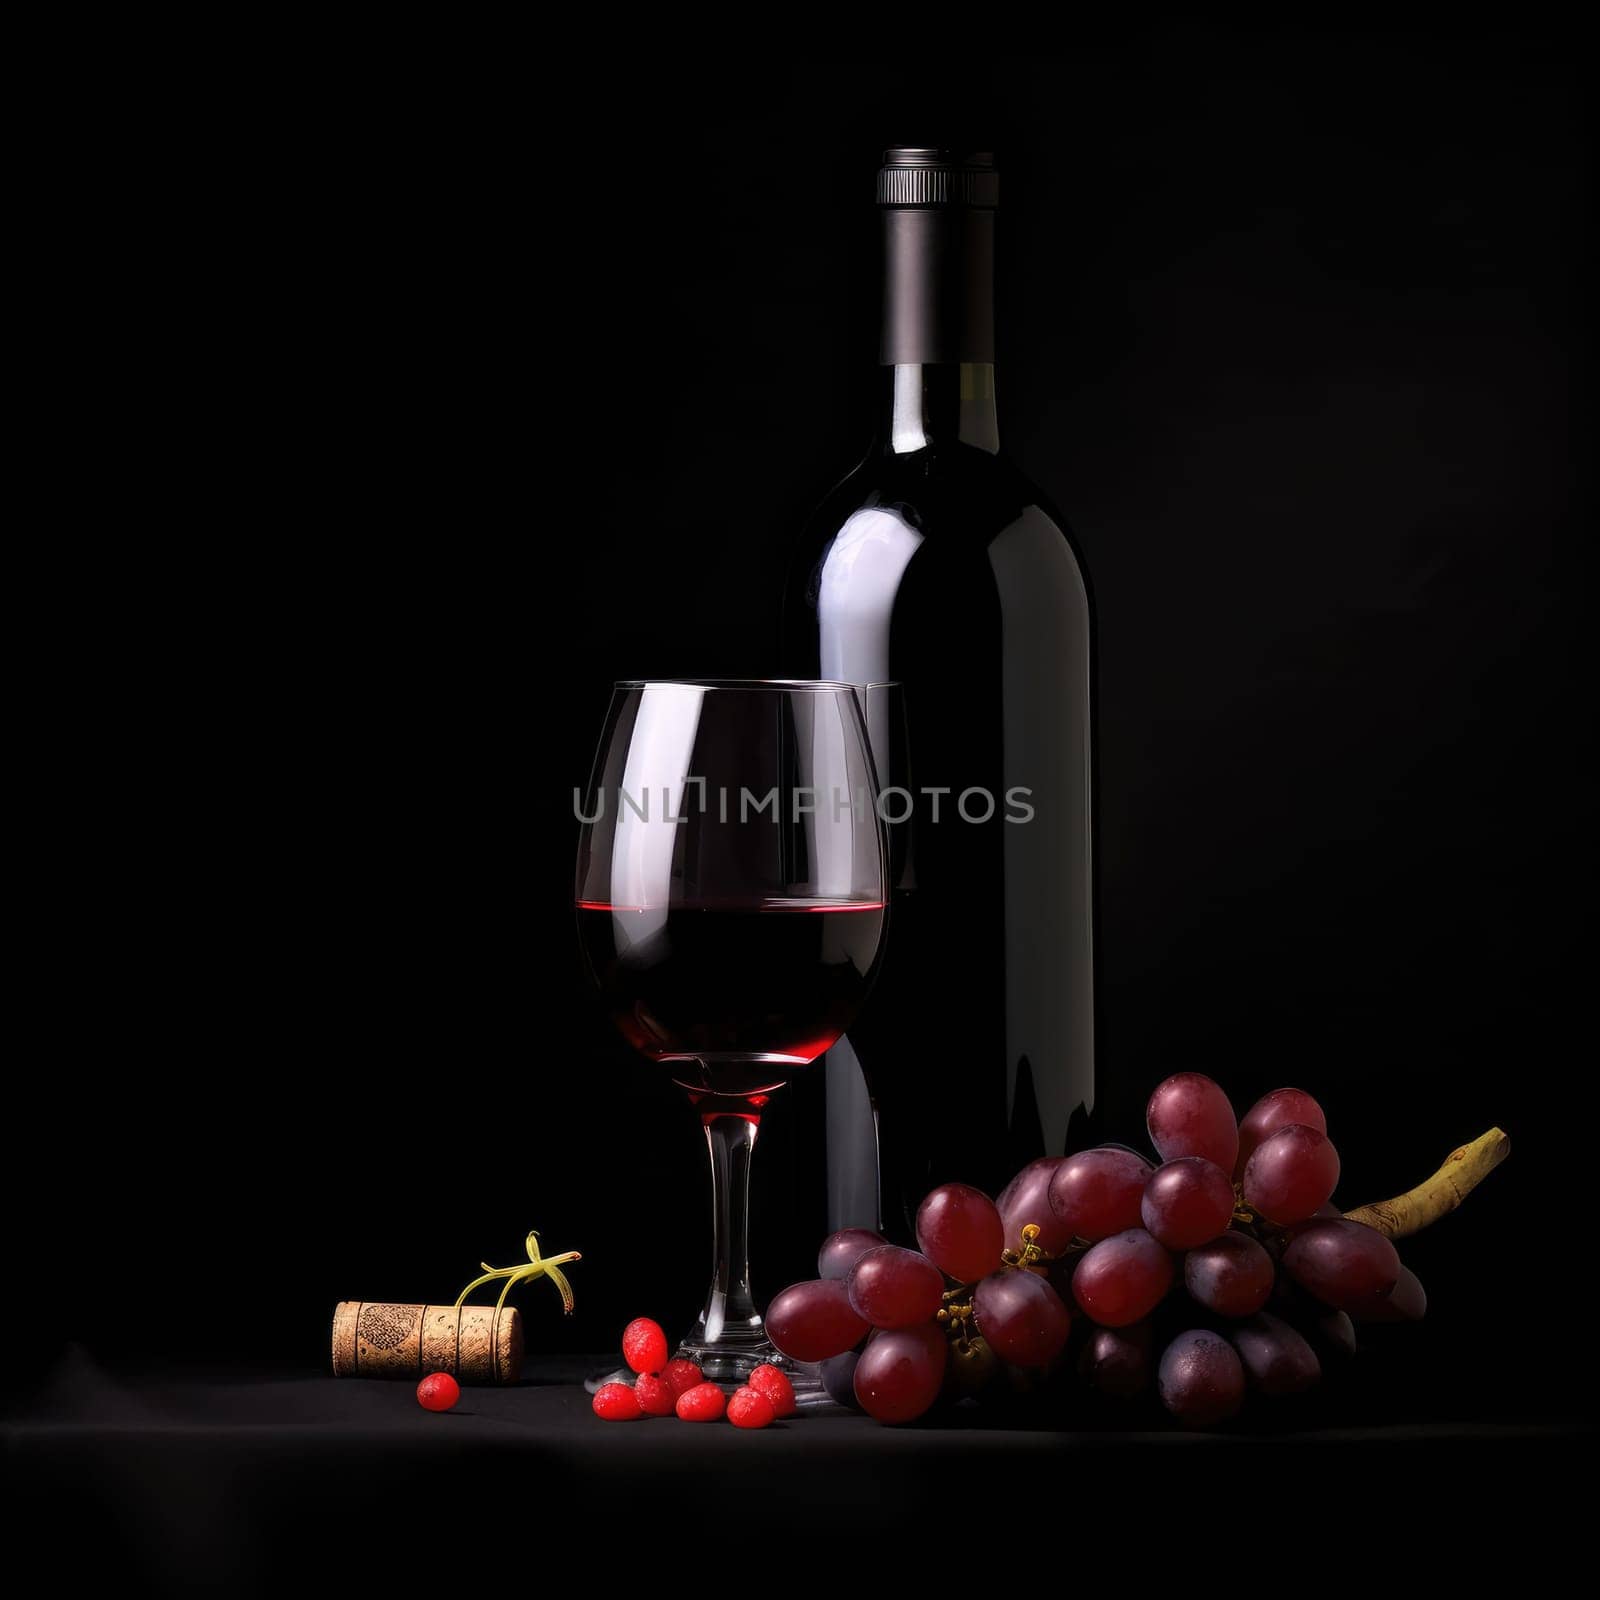 A bottle of red wine with a glass and winegrad on a dark background